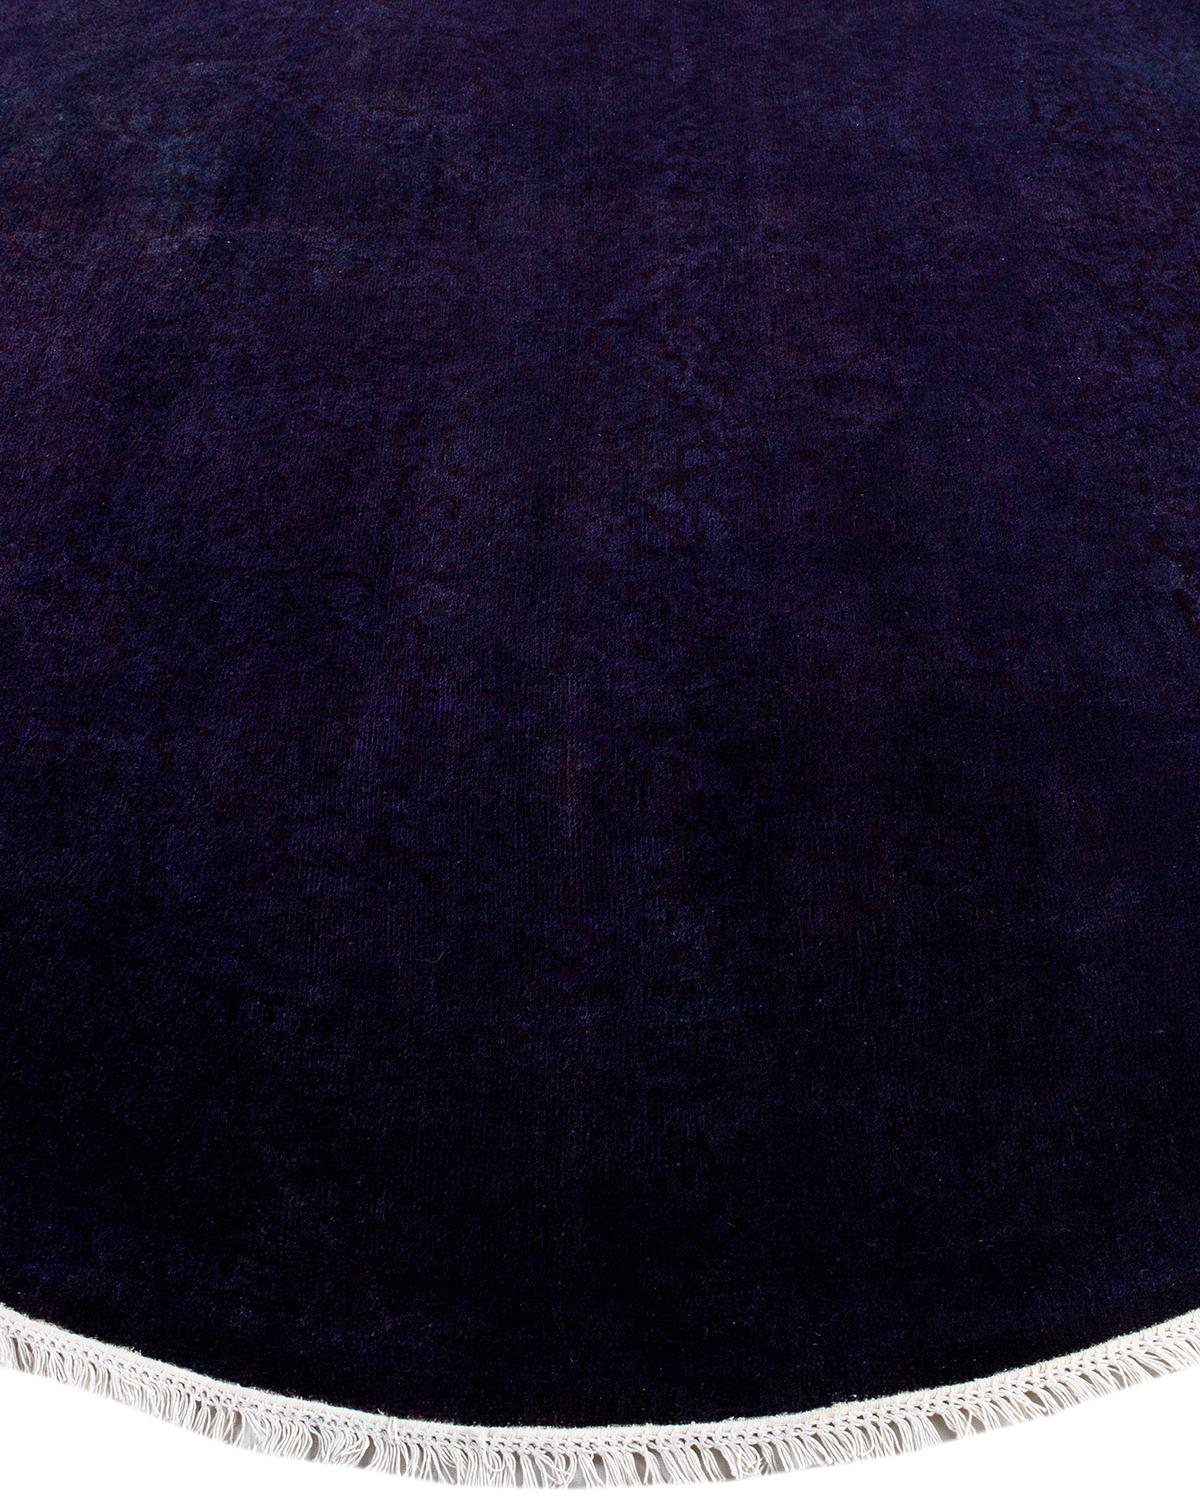 Contemporary Overdyed Hand Knotted Wool Purple Round Area Rug In New Condition For Sale In Norwalk, CT